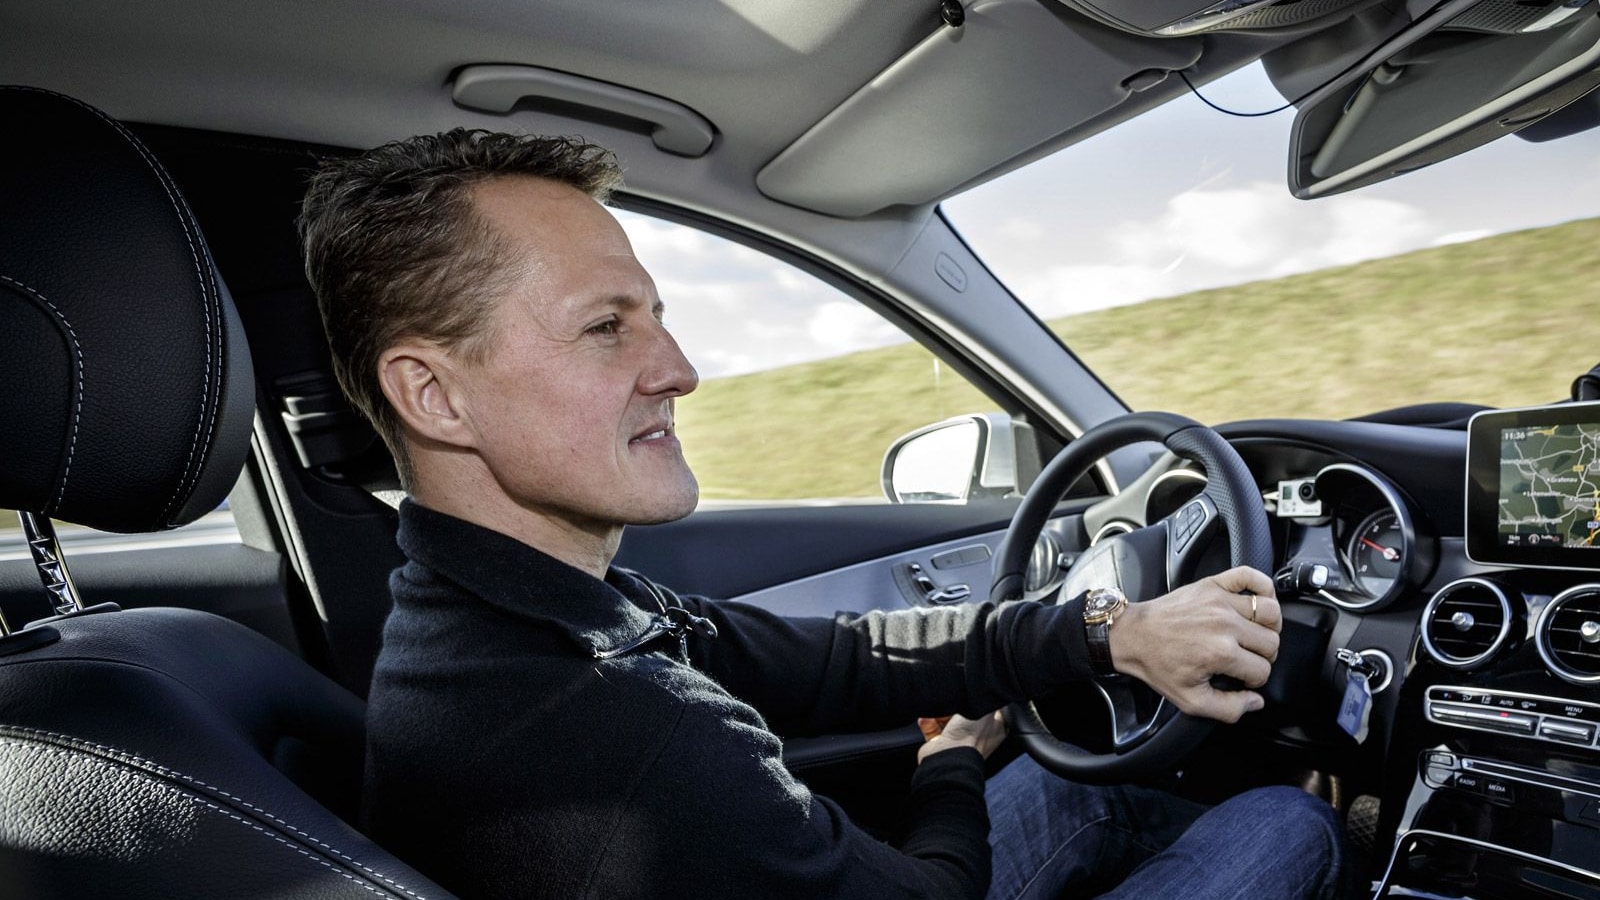 Michael Schumacher tests new assistance systems on the 2015 Mercedes-Benz C-Class